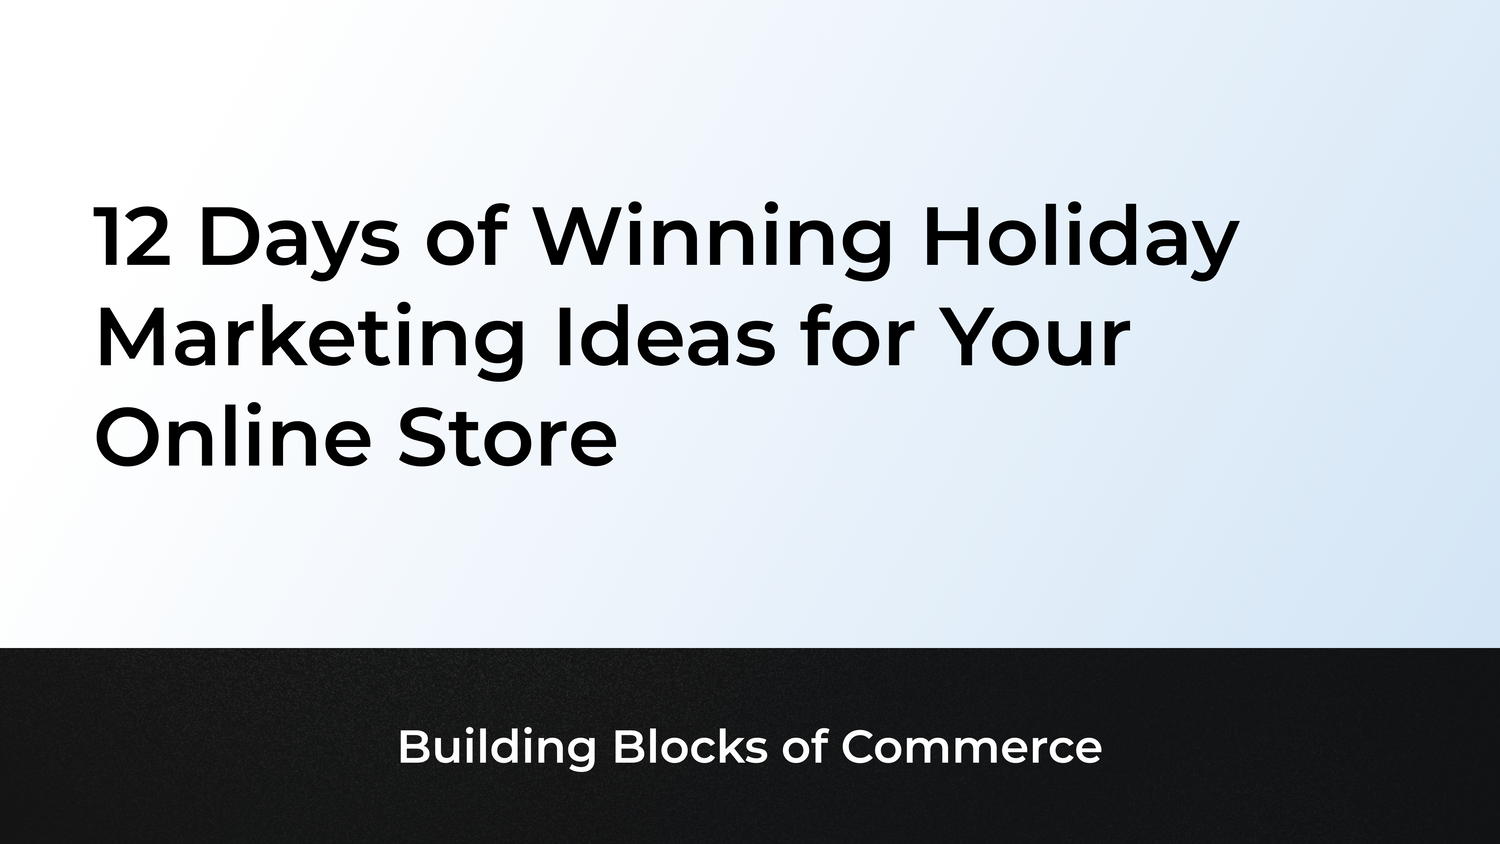 12 Days of Winning Holiday Marketing Ideas for Your Online Store